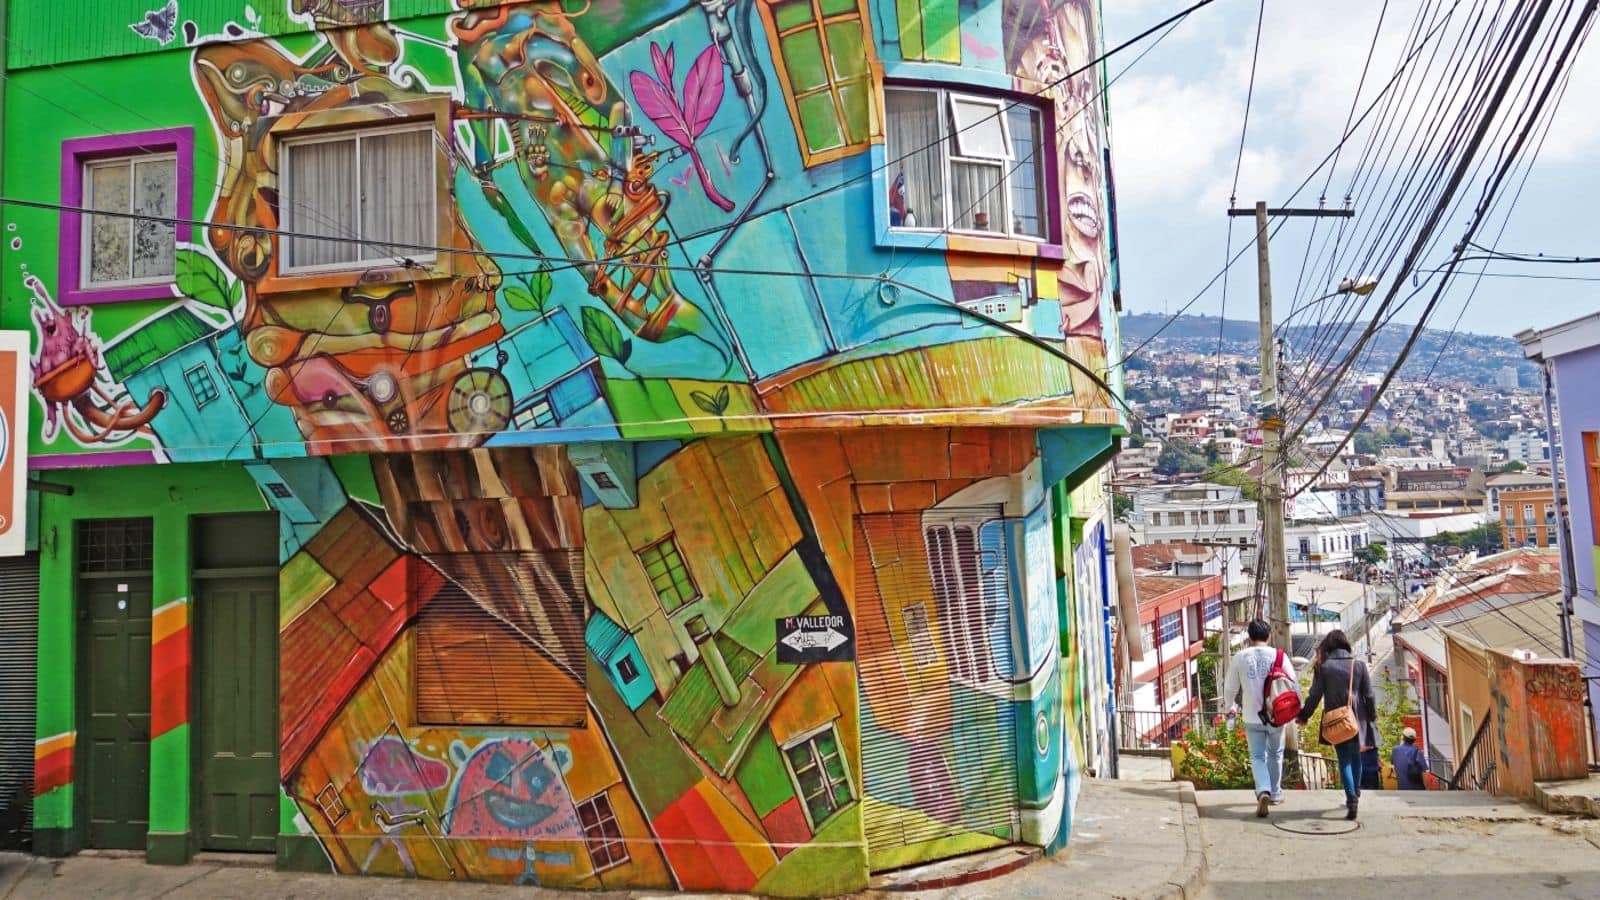 Discover Valparaiso's street art scene with this guide